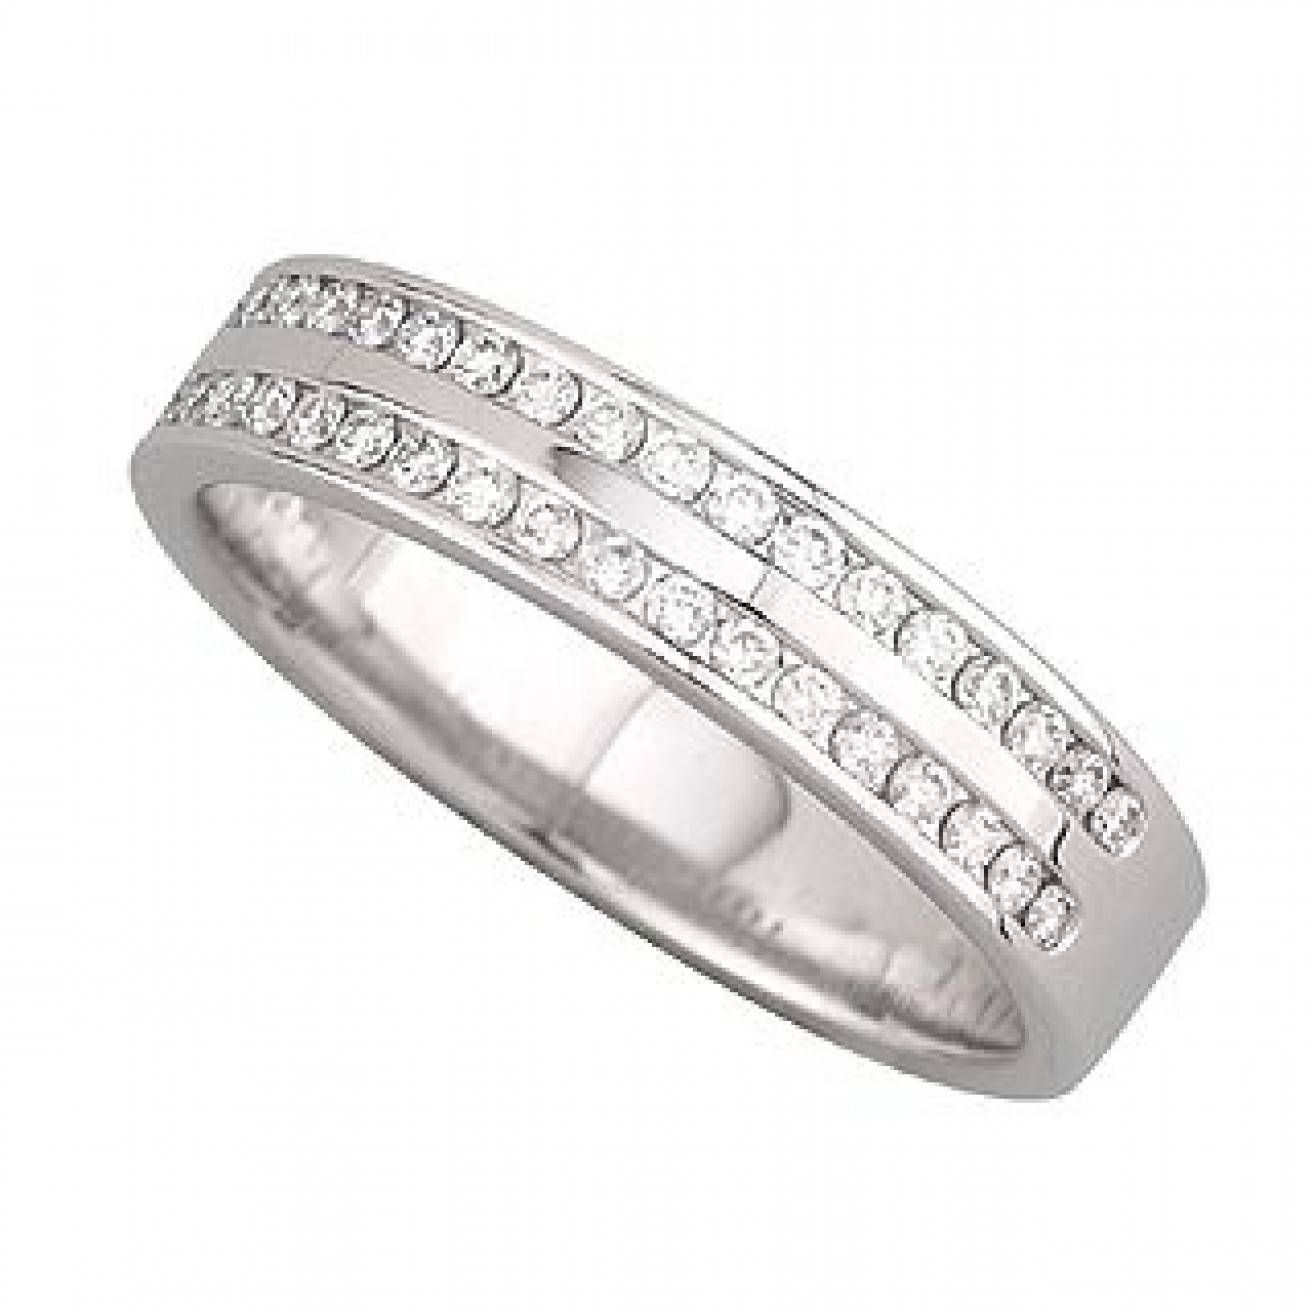 Buy Platinum Wedding Bands Online – Fraser Hart With Regard To Wedding Rings With Platinum Diamond (View 6 of 15)